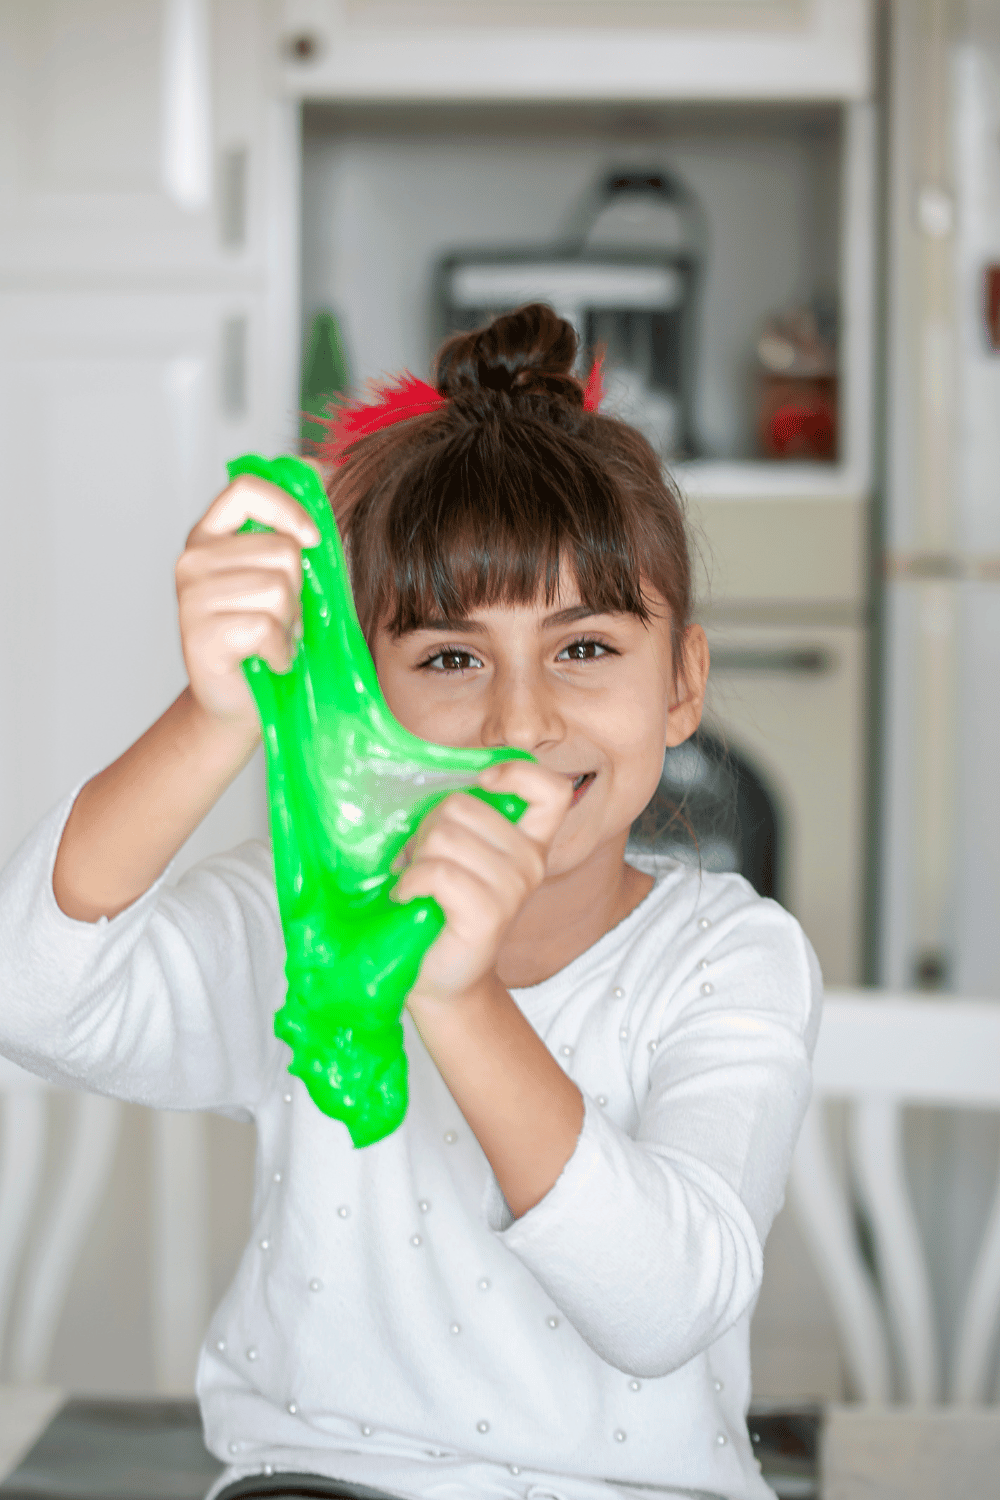 Top 7 Reasons to Make Slime with Your Kids